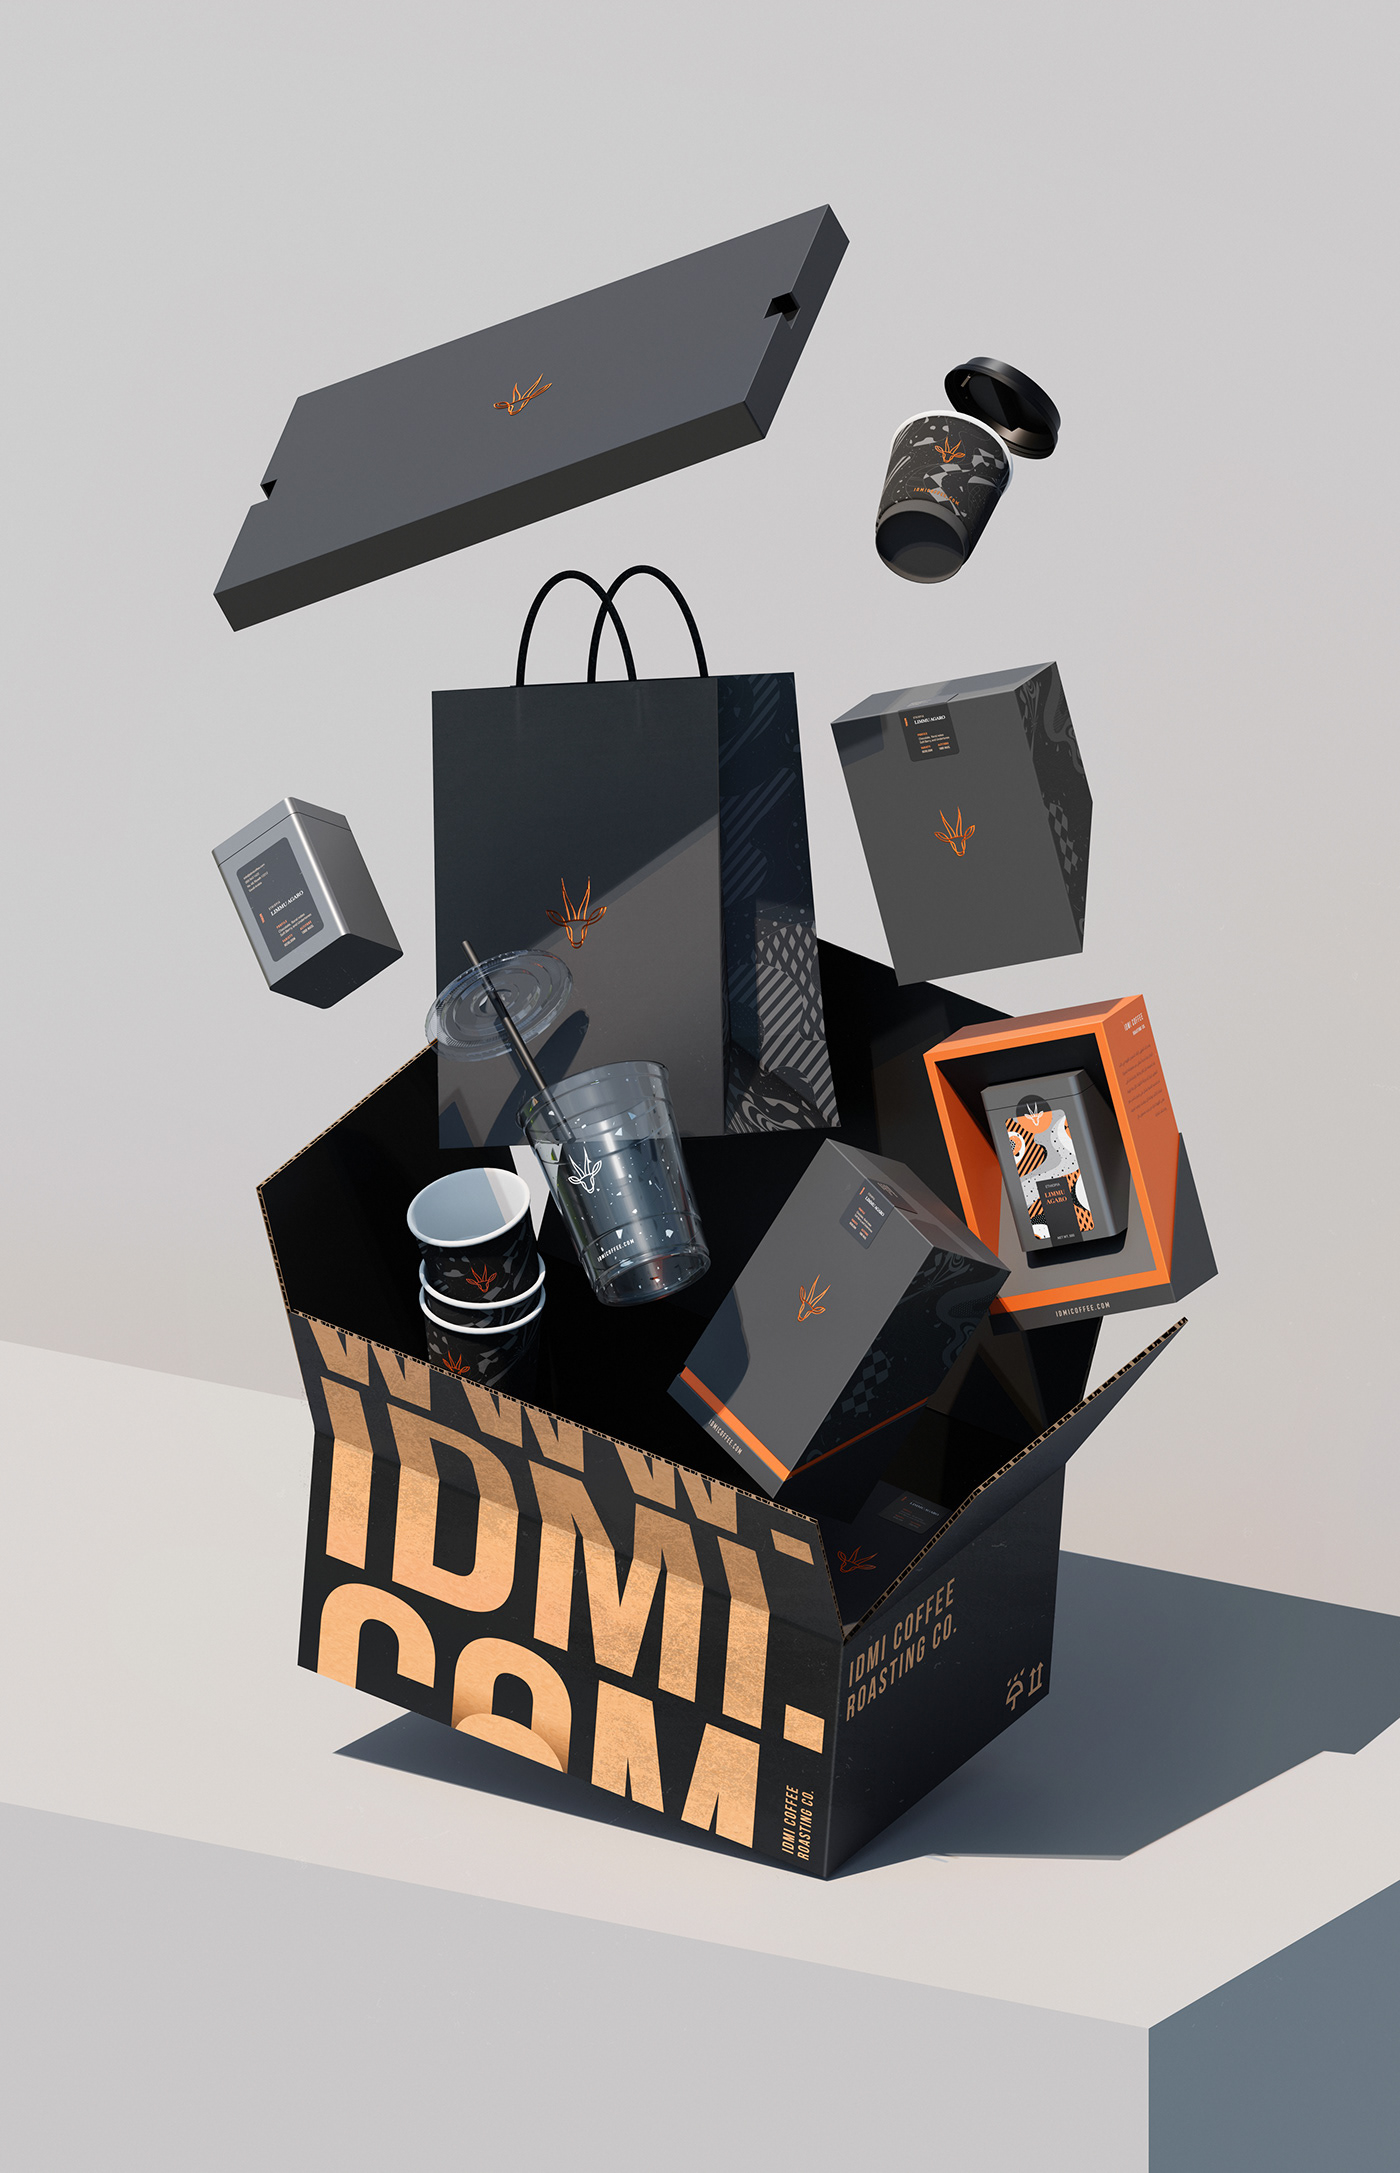 Idmi Limited Edition Packaging Design, Illustration, and Creative Direction by Nunarra Studio